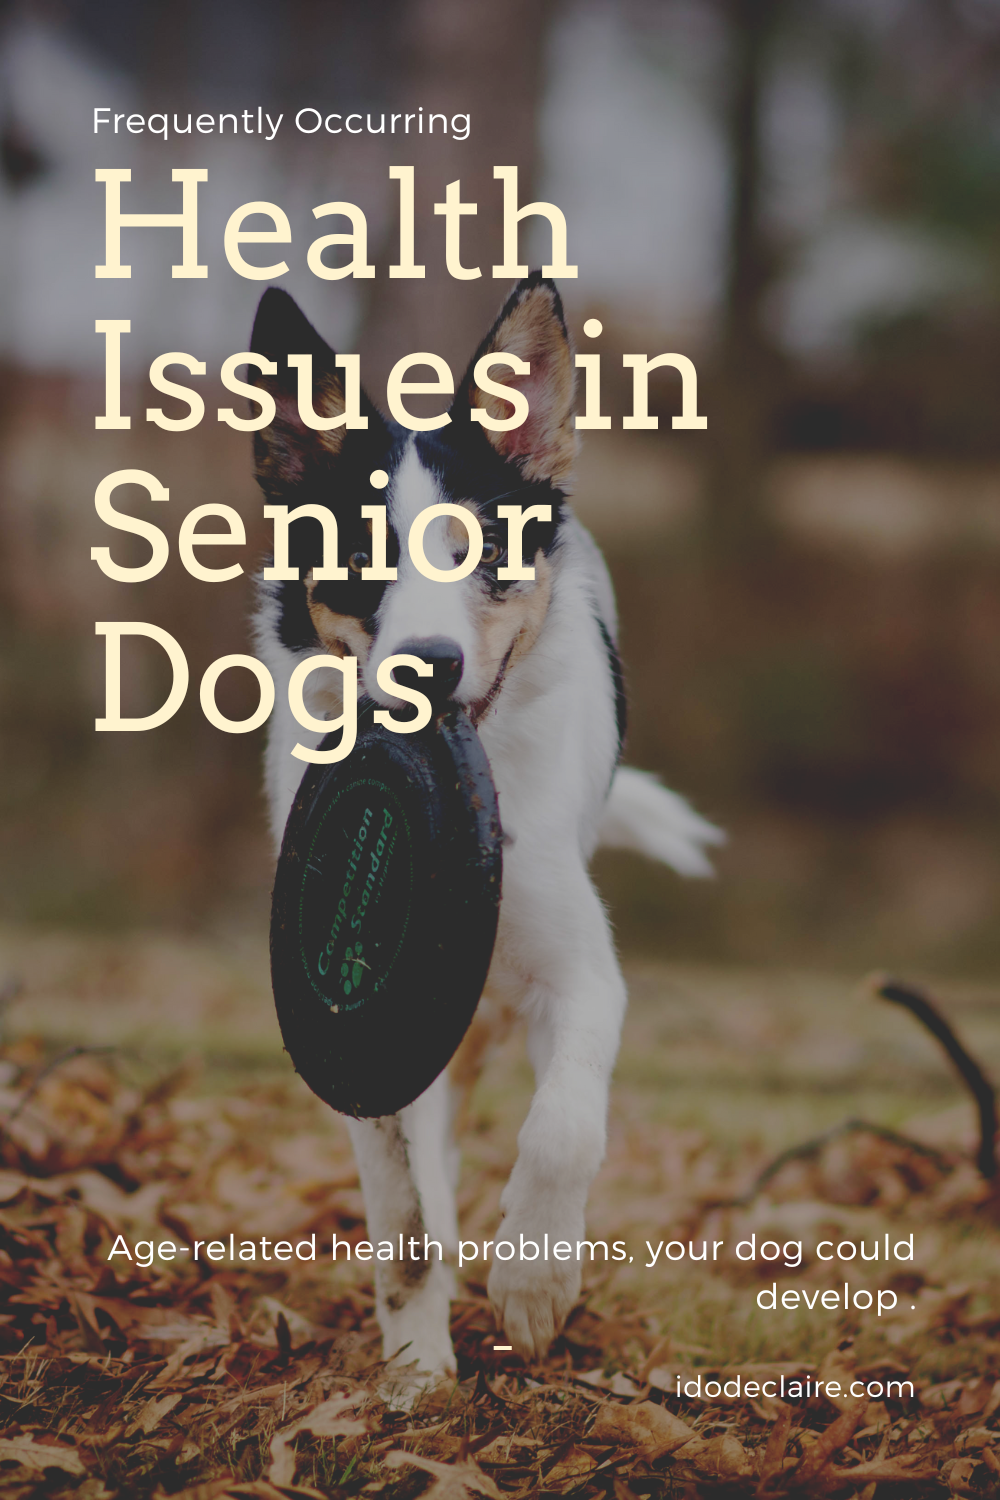 3 Frequently Occurring Health Issues in Senior Dogs